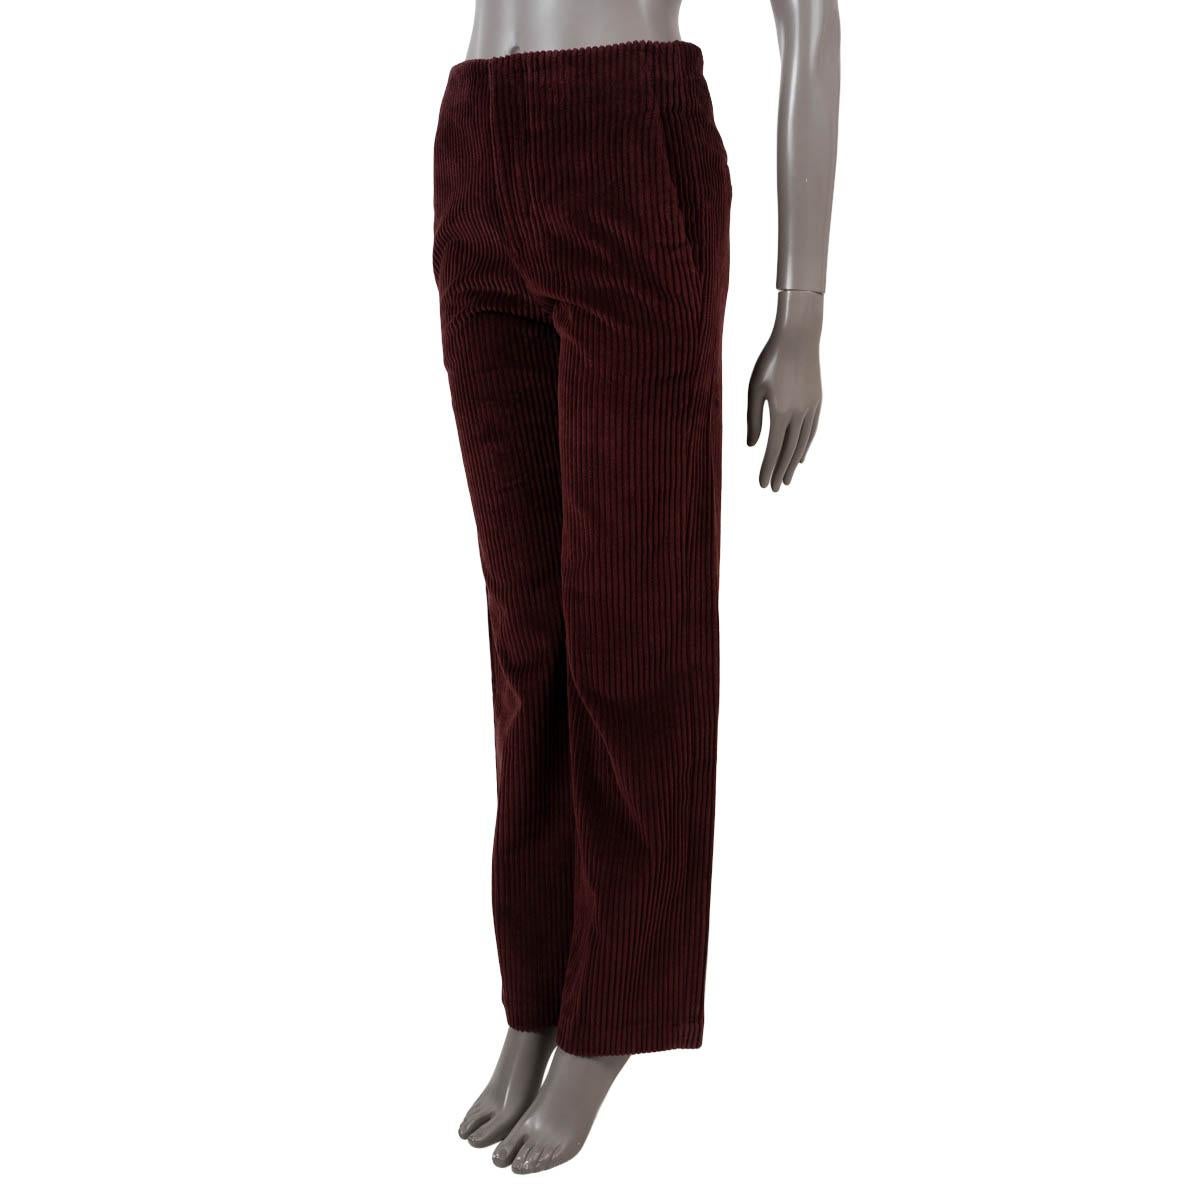 100% authentic Brunello Cucinelli corduroy pants in burgundy cotton (100%). Feature two slit pockets on the side und back. Opens with hooks, zipper and a button on the front. Unlined. Has been worn and is in excellent condition.

Measurements
Tag